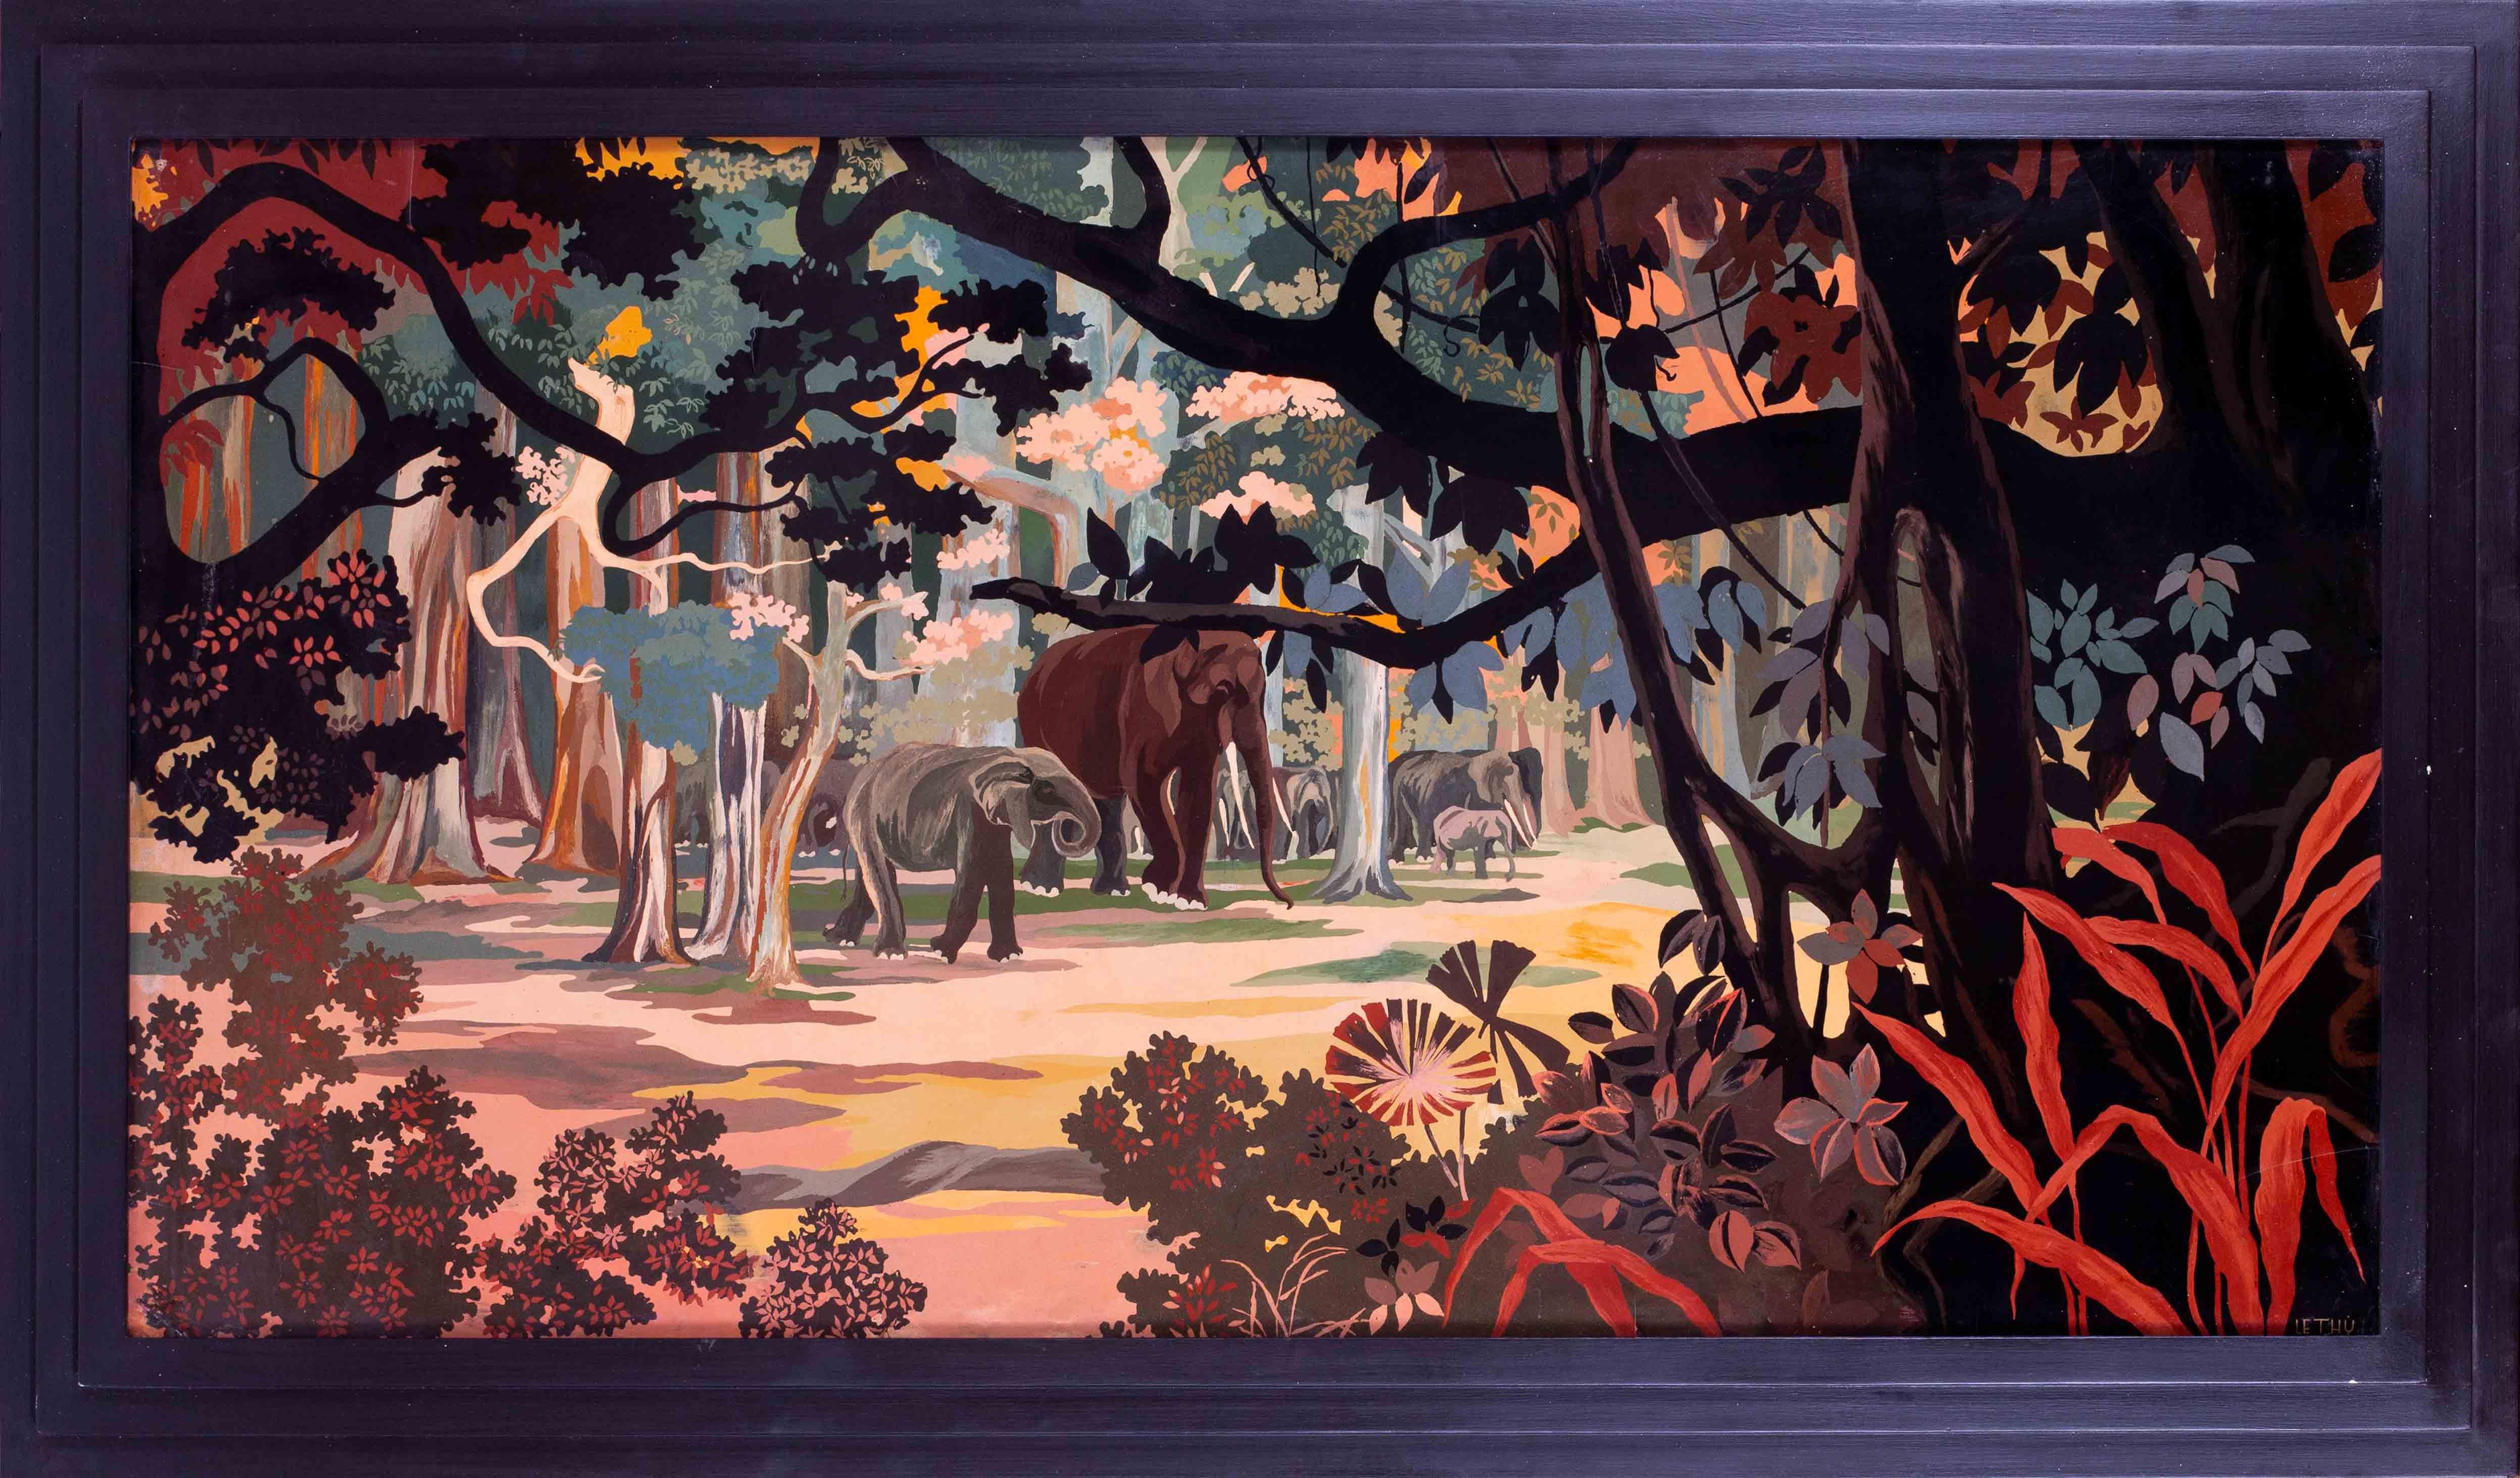 A large art deco lacquer panel of elephants in a forest, blacks, reds and browns - Art by Lê Thy